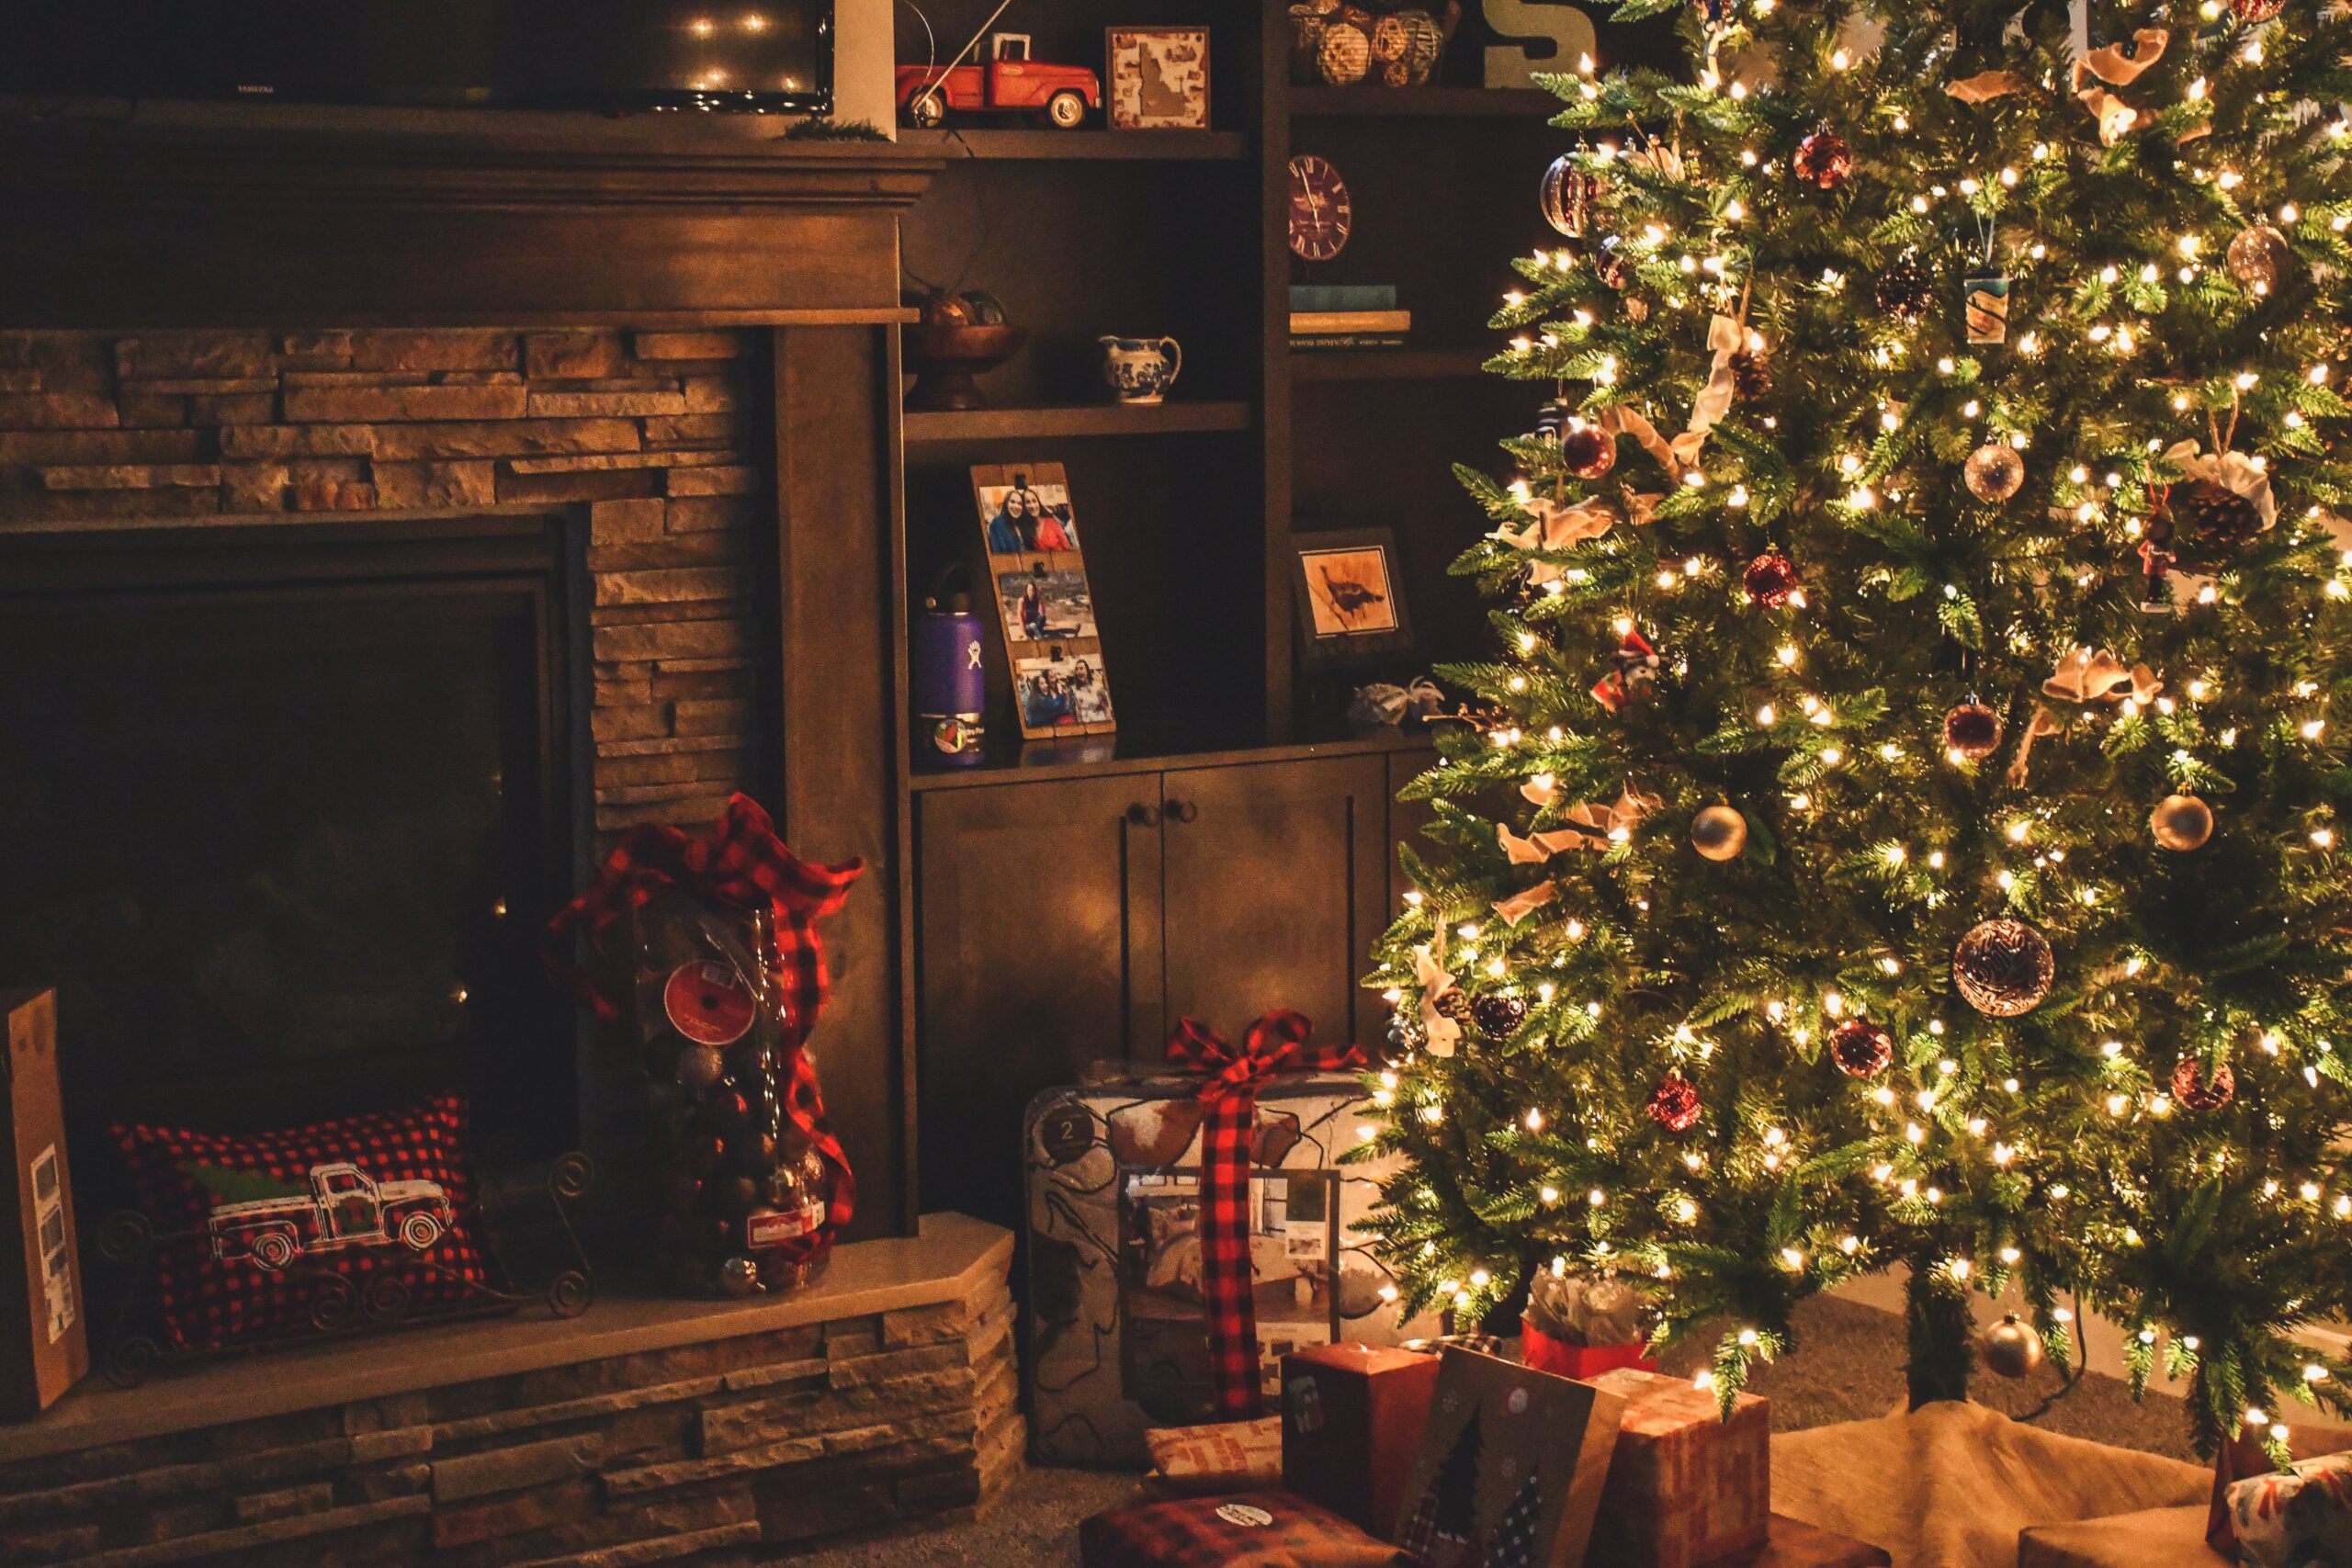 5 Holiday Fire Hazards and Prevention Tips